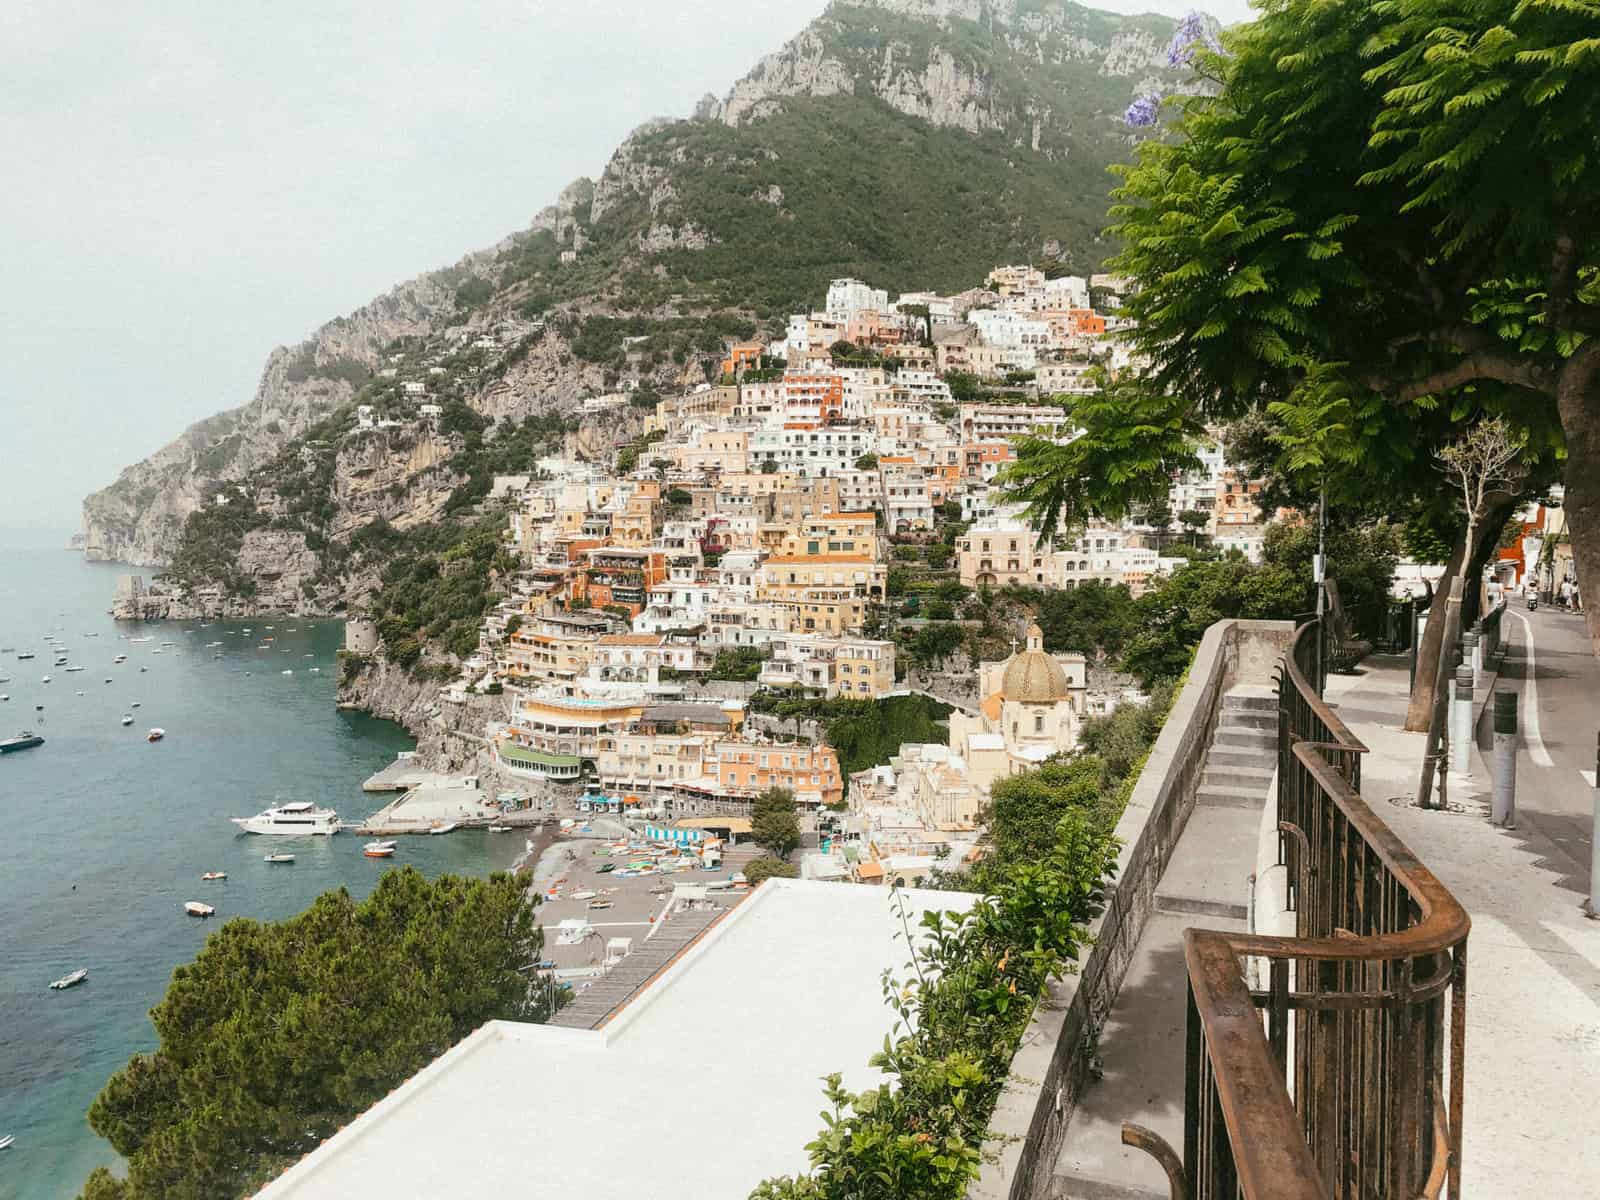 The Amalfi Coast buildings from a distance.